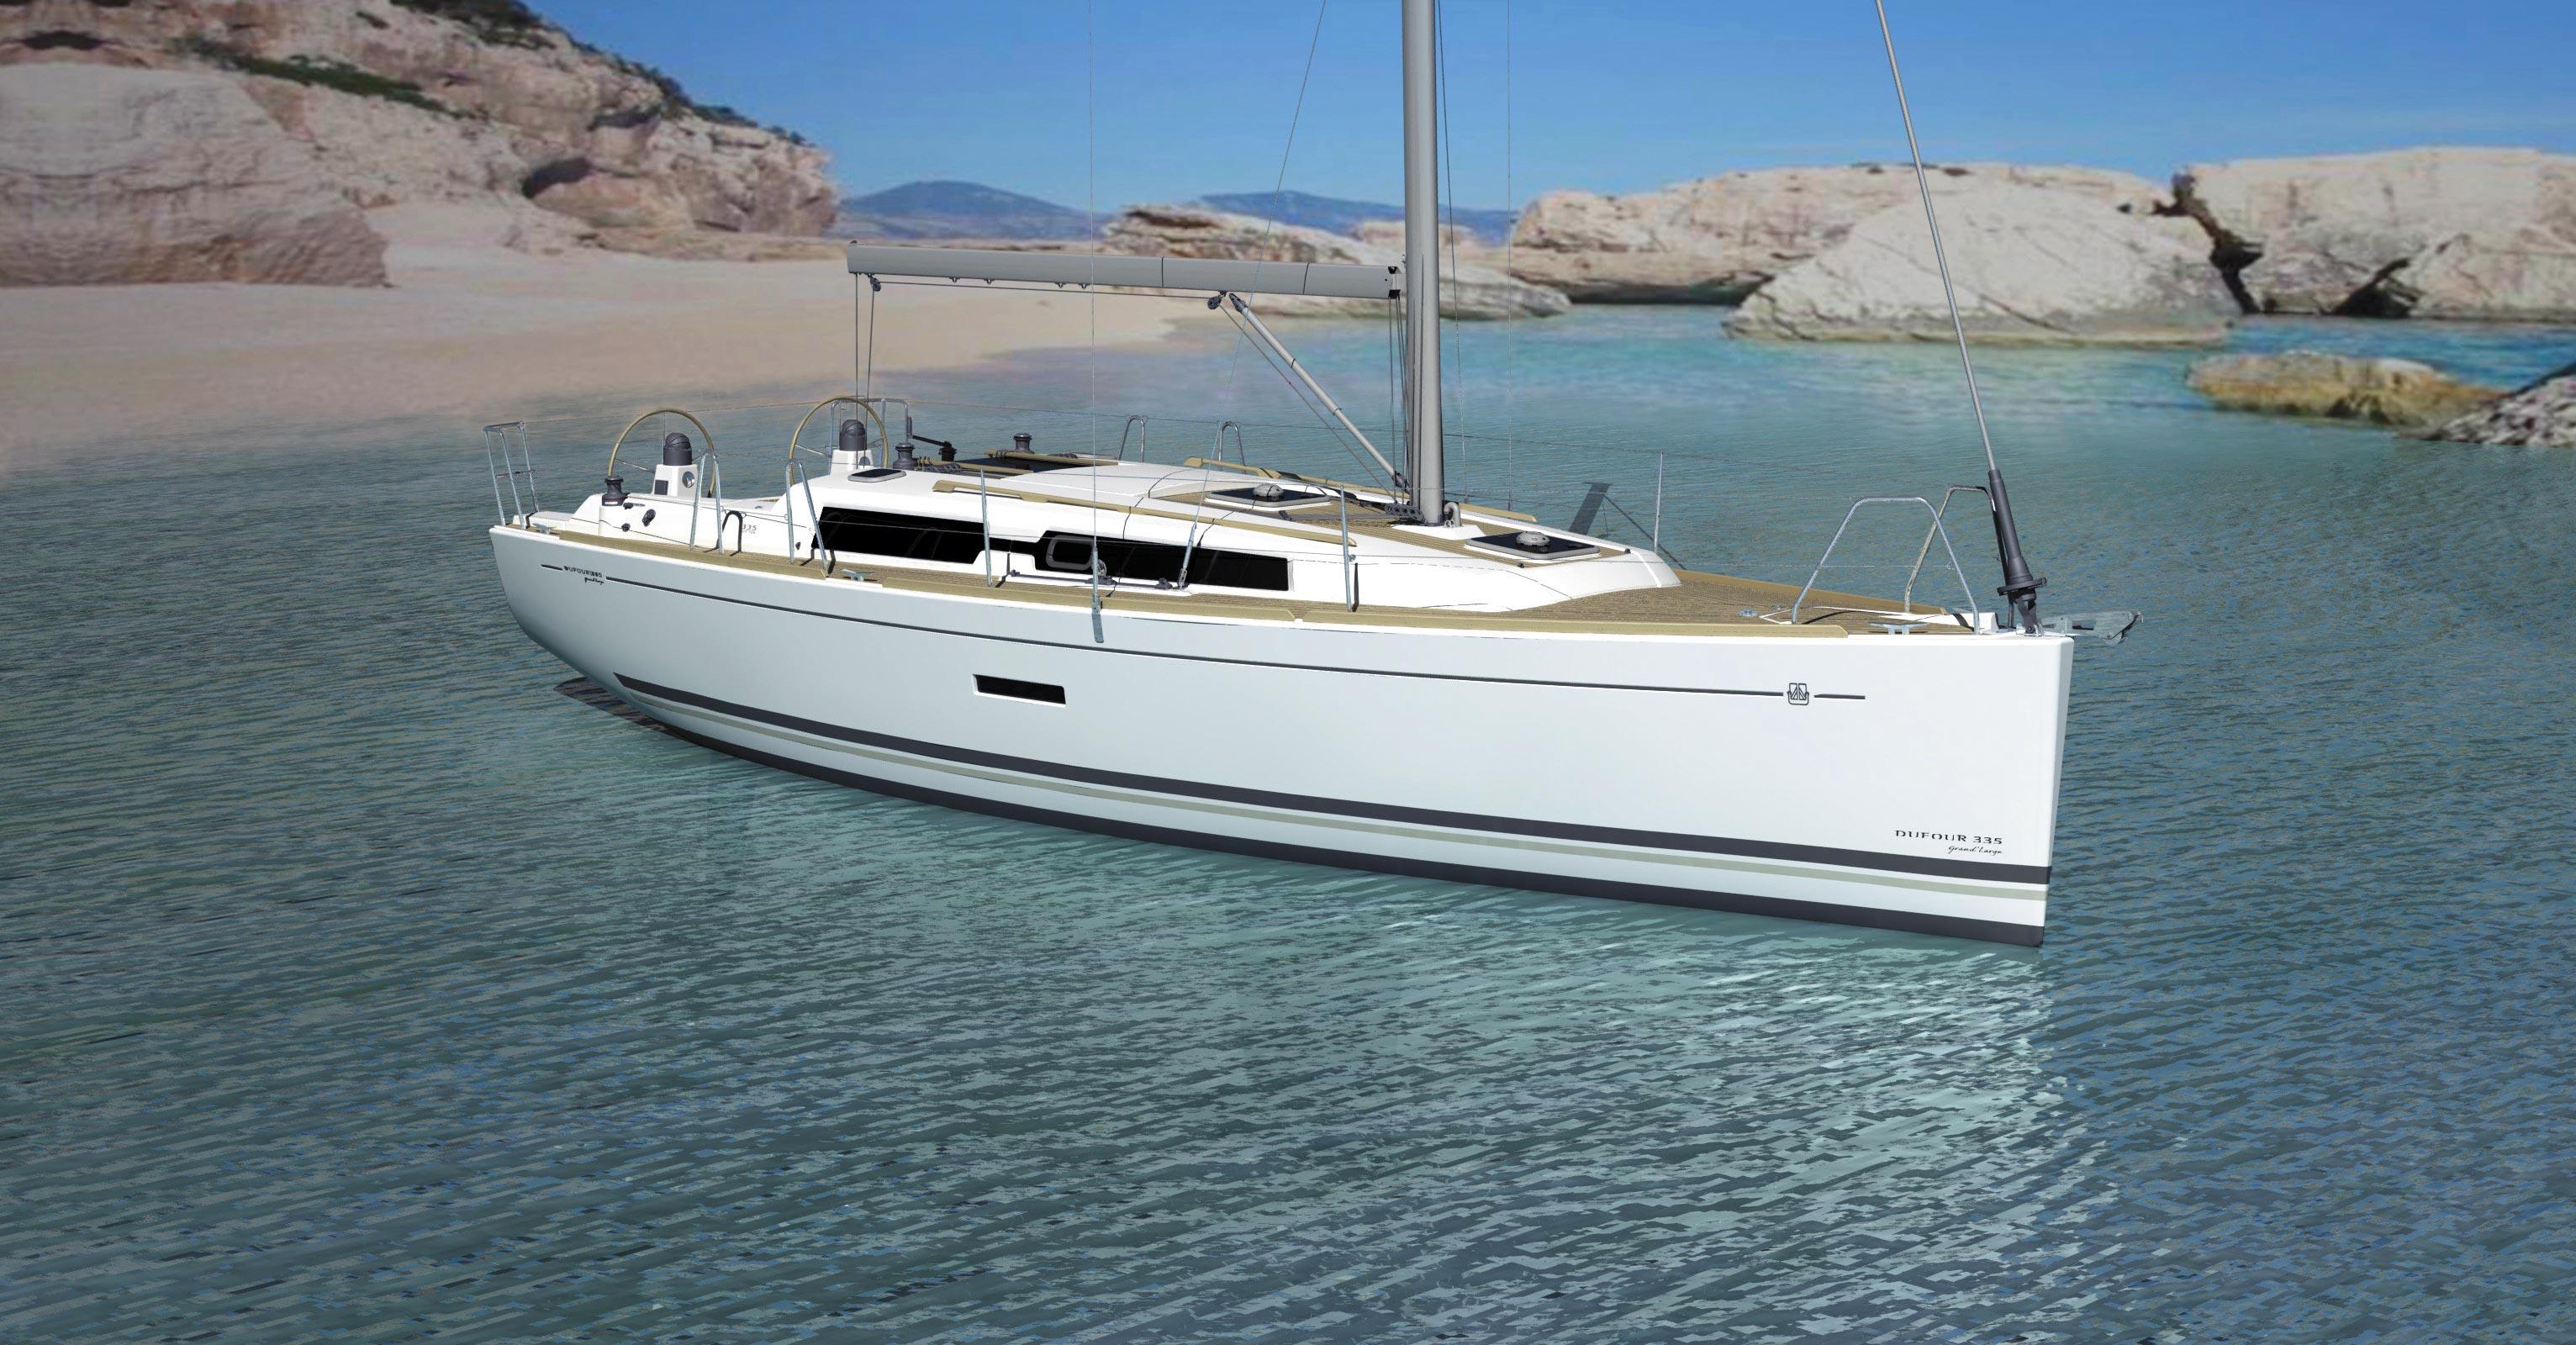 NEW YACHTS — Dufour Grand' Large 335